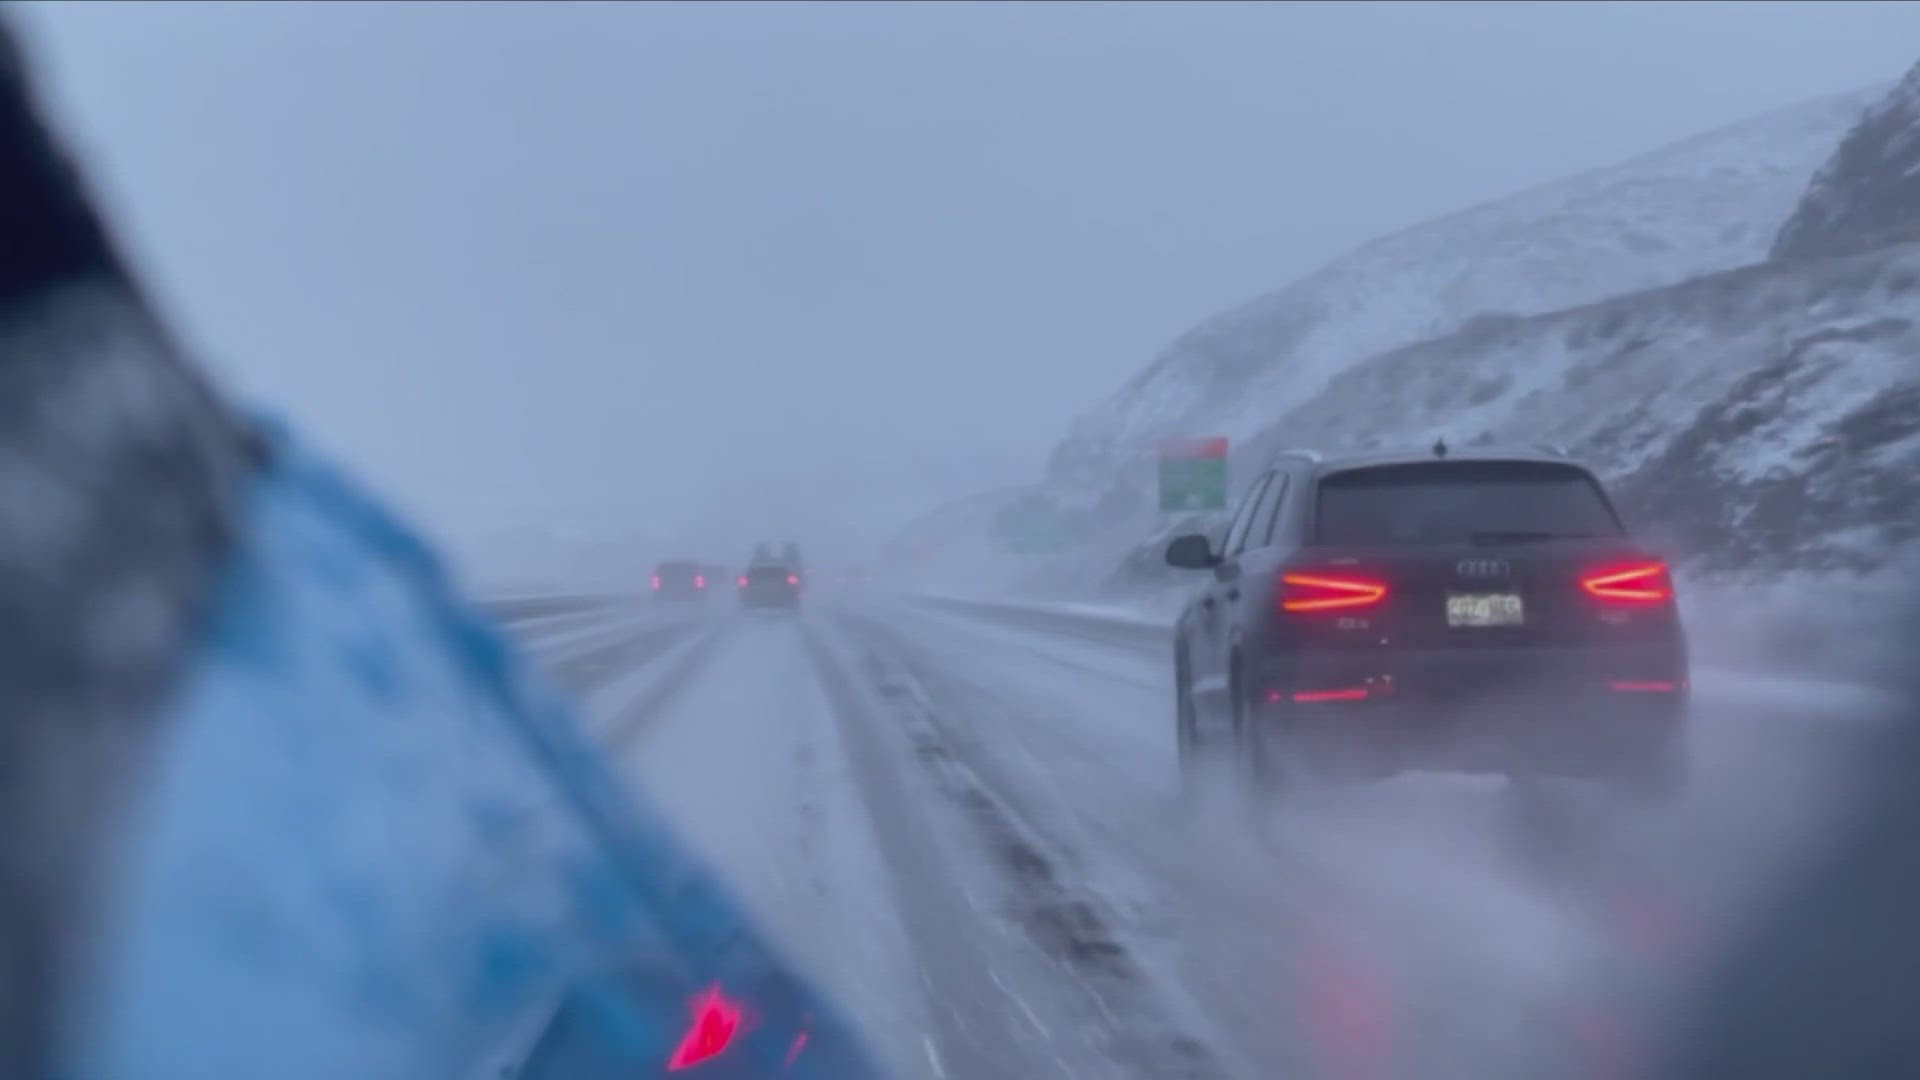 Multiple crashes were reported along Highway 285 Thursday night and roads were slick along I-70 in Golden, with poor visibility.